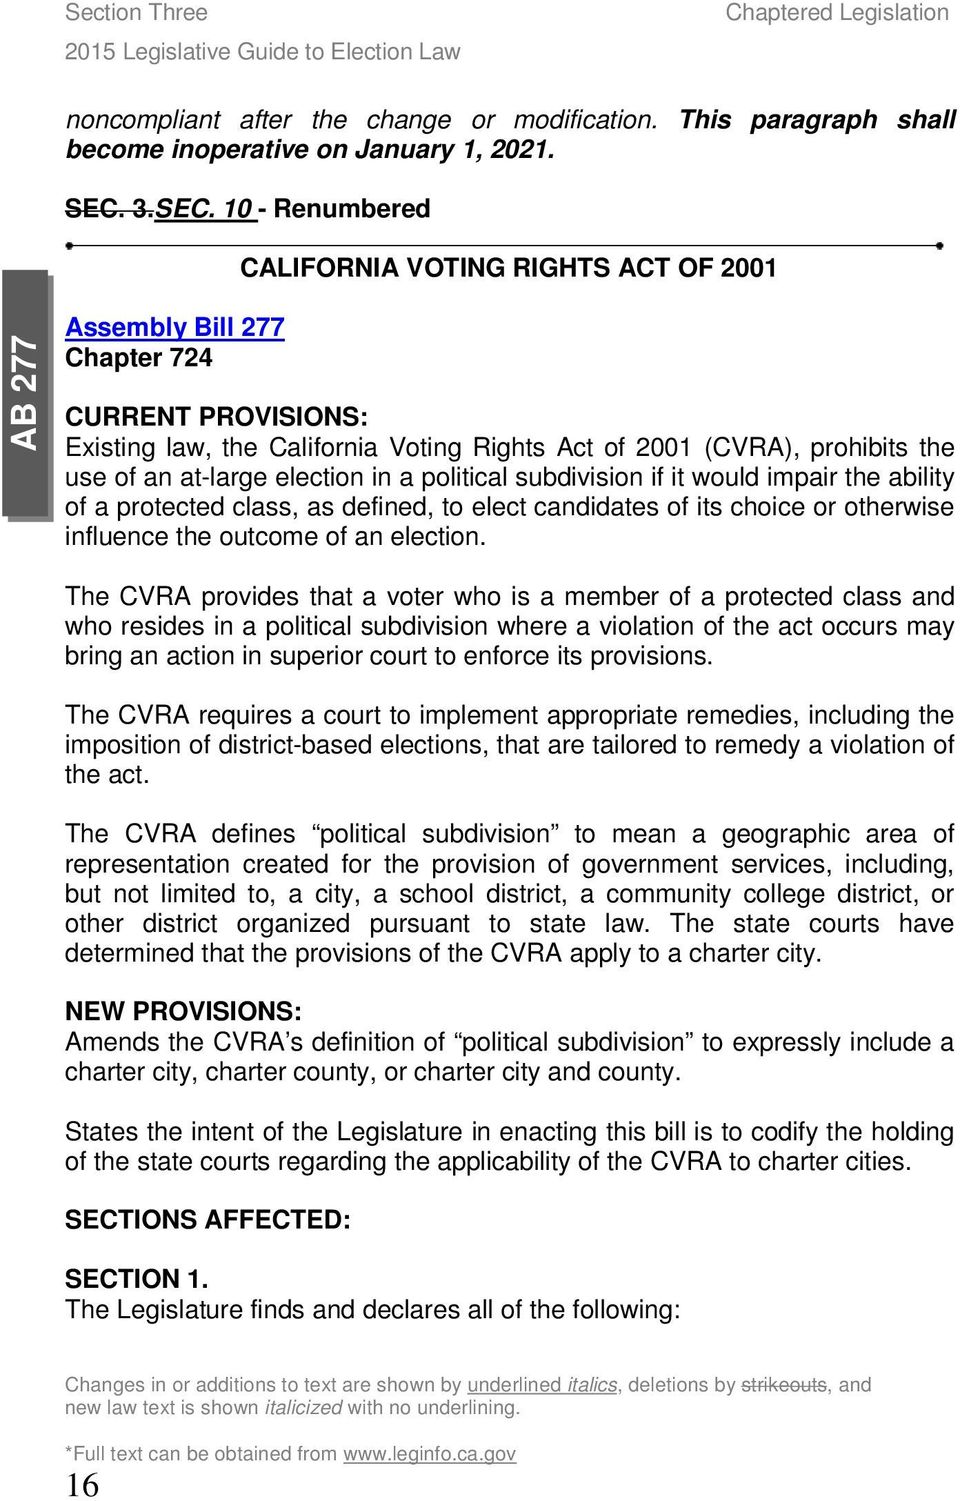 10 - Renumbered CALIFORNIA VOTING RIGHTS ACT OF 2001 AB 277 Assembly Bill 277 Chapter 724 CURRENT PROVISIONS: Existing law, the California Voting Rights Act of 2001 (CVRA), prohibits the use of an